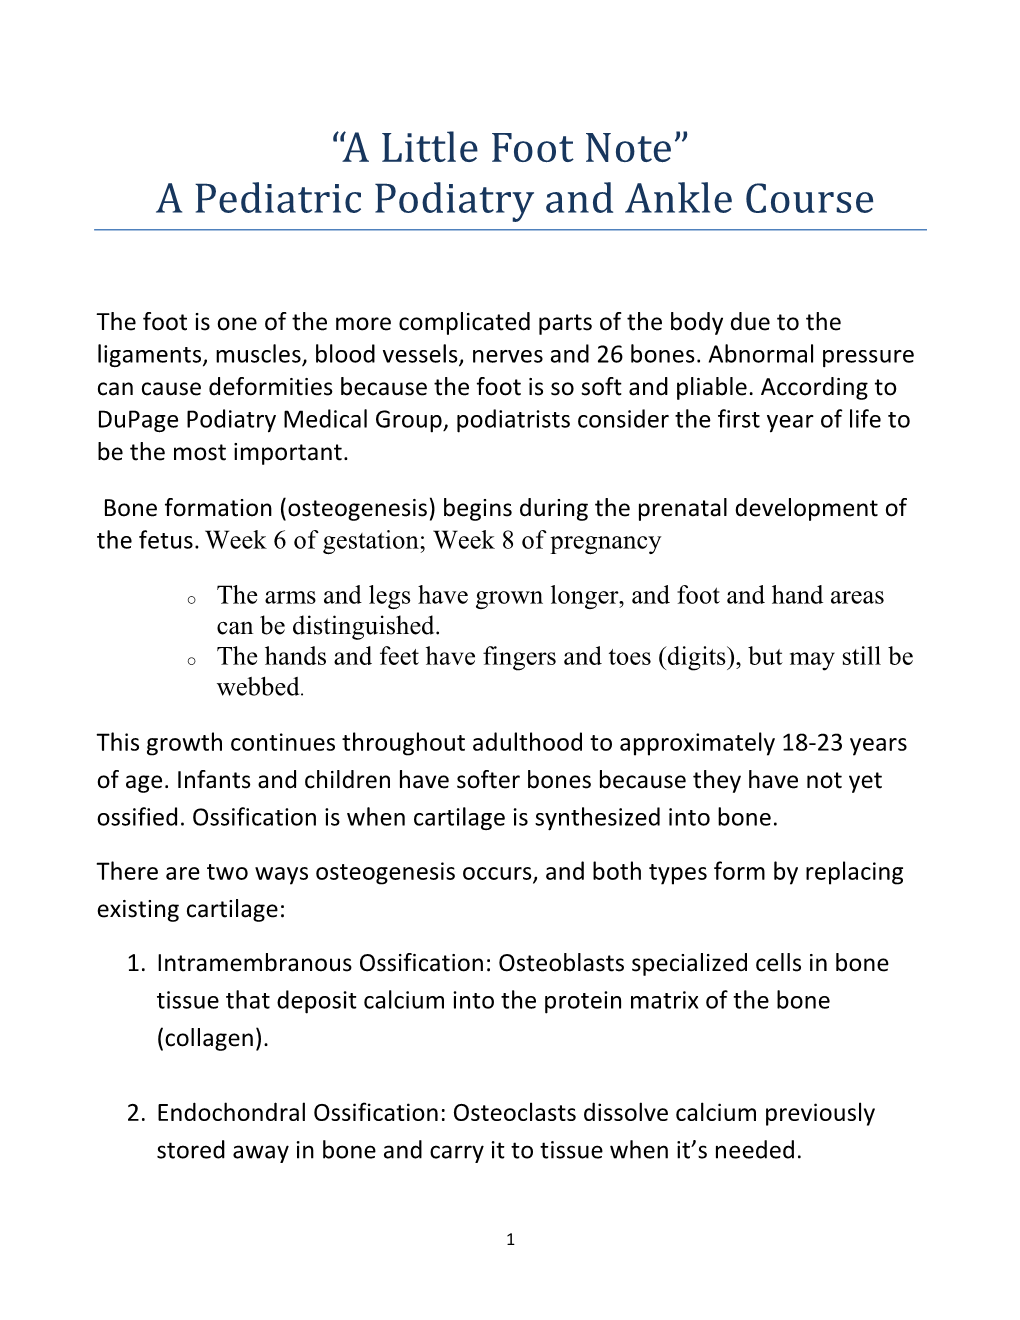 “A Little Foot Note” a Pediatric Podiatry and Ankle Course